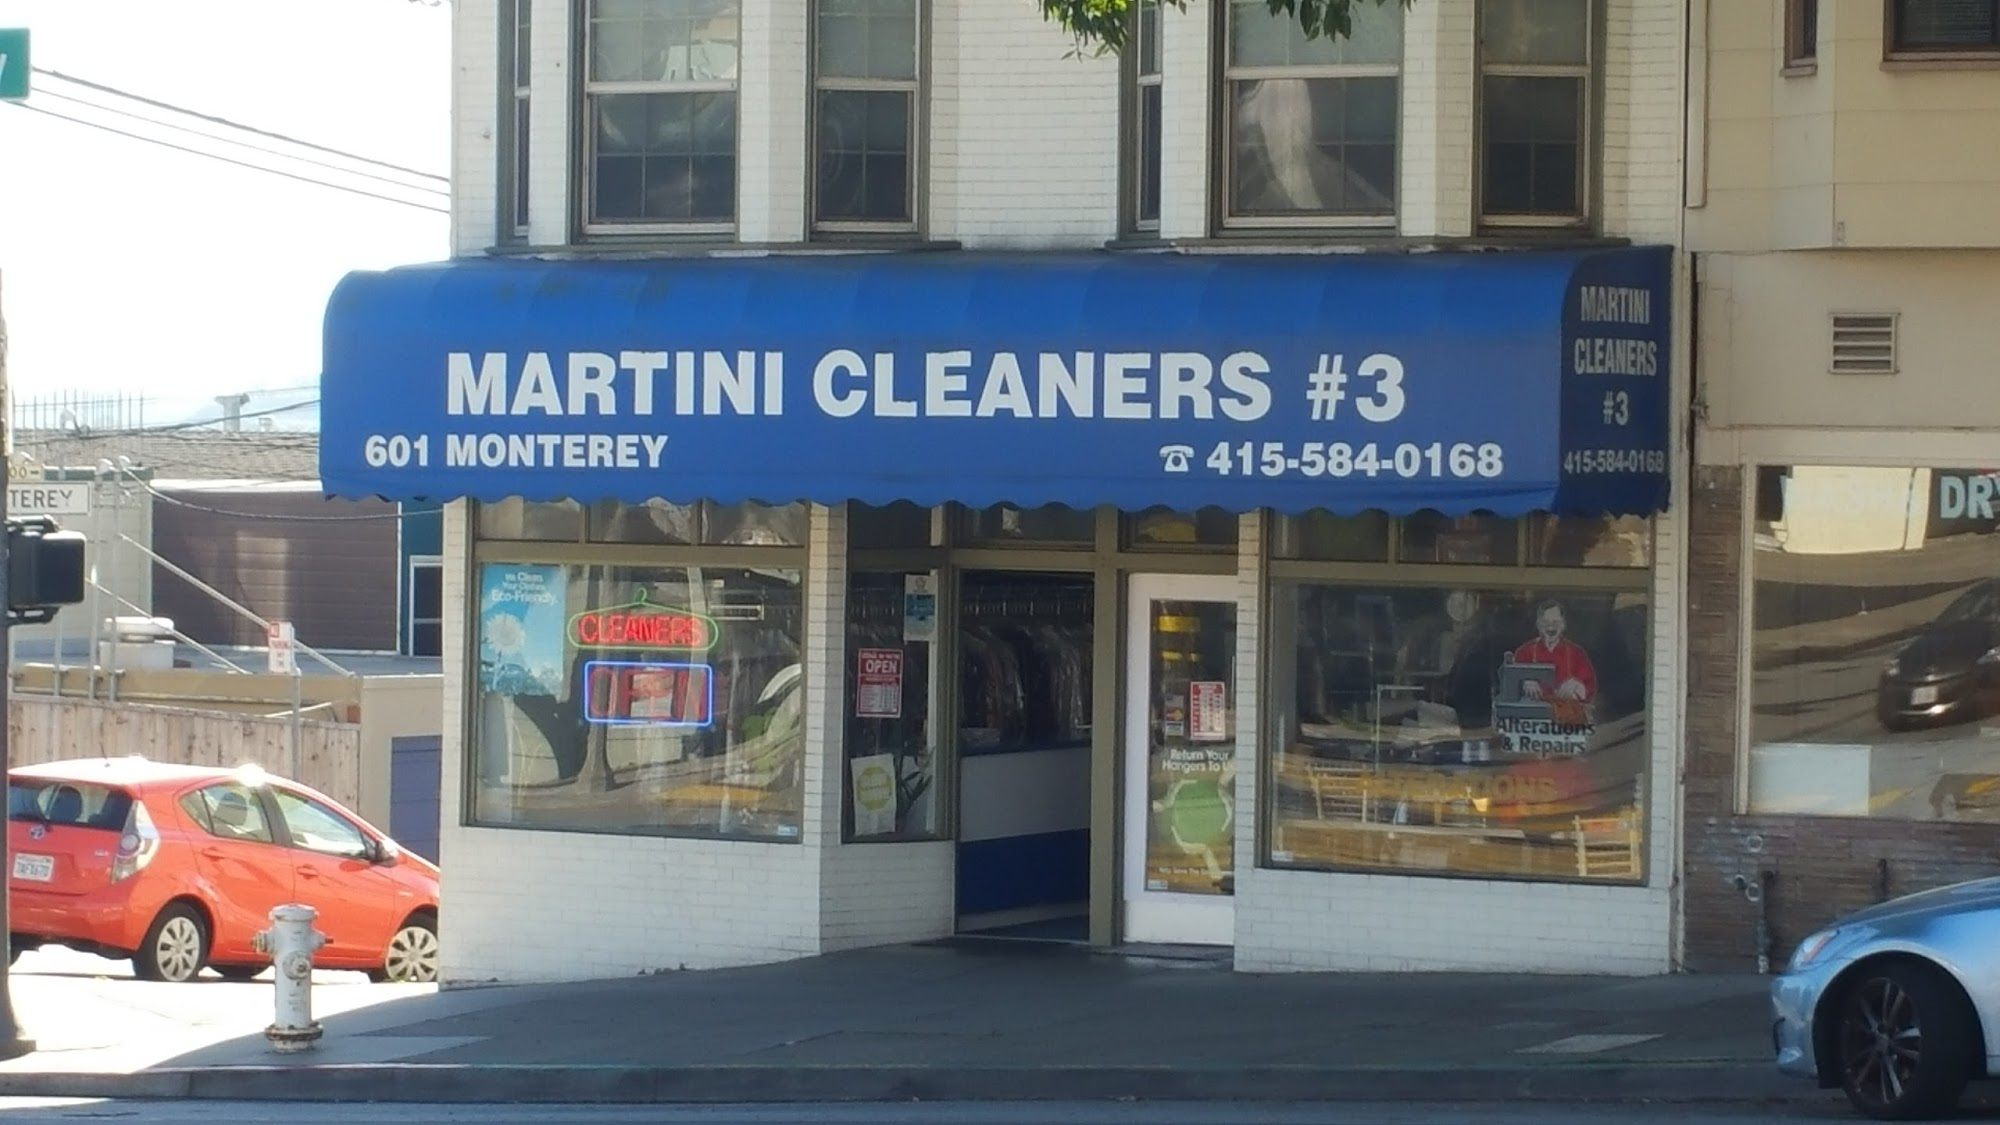 Martini Cleaners #3